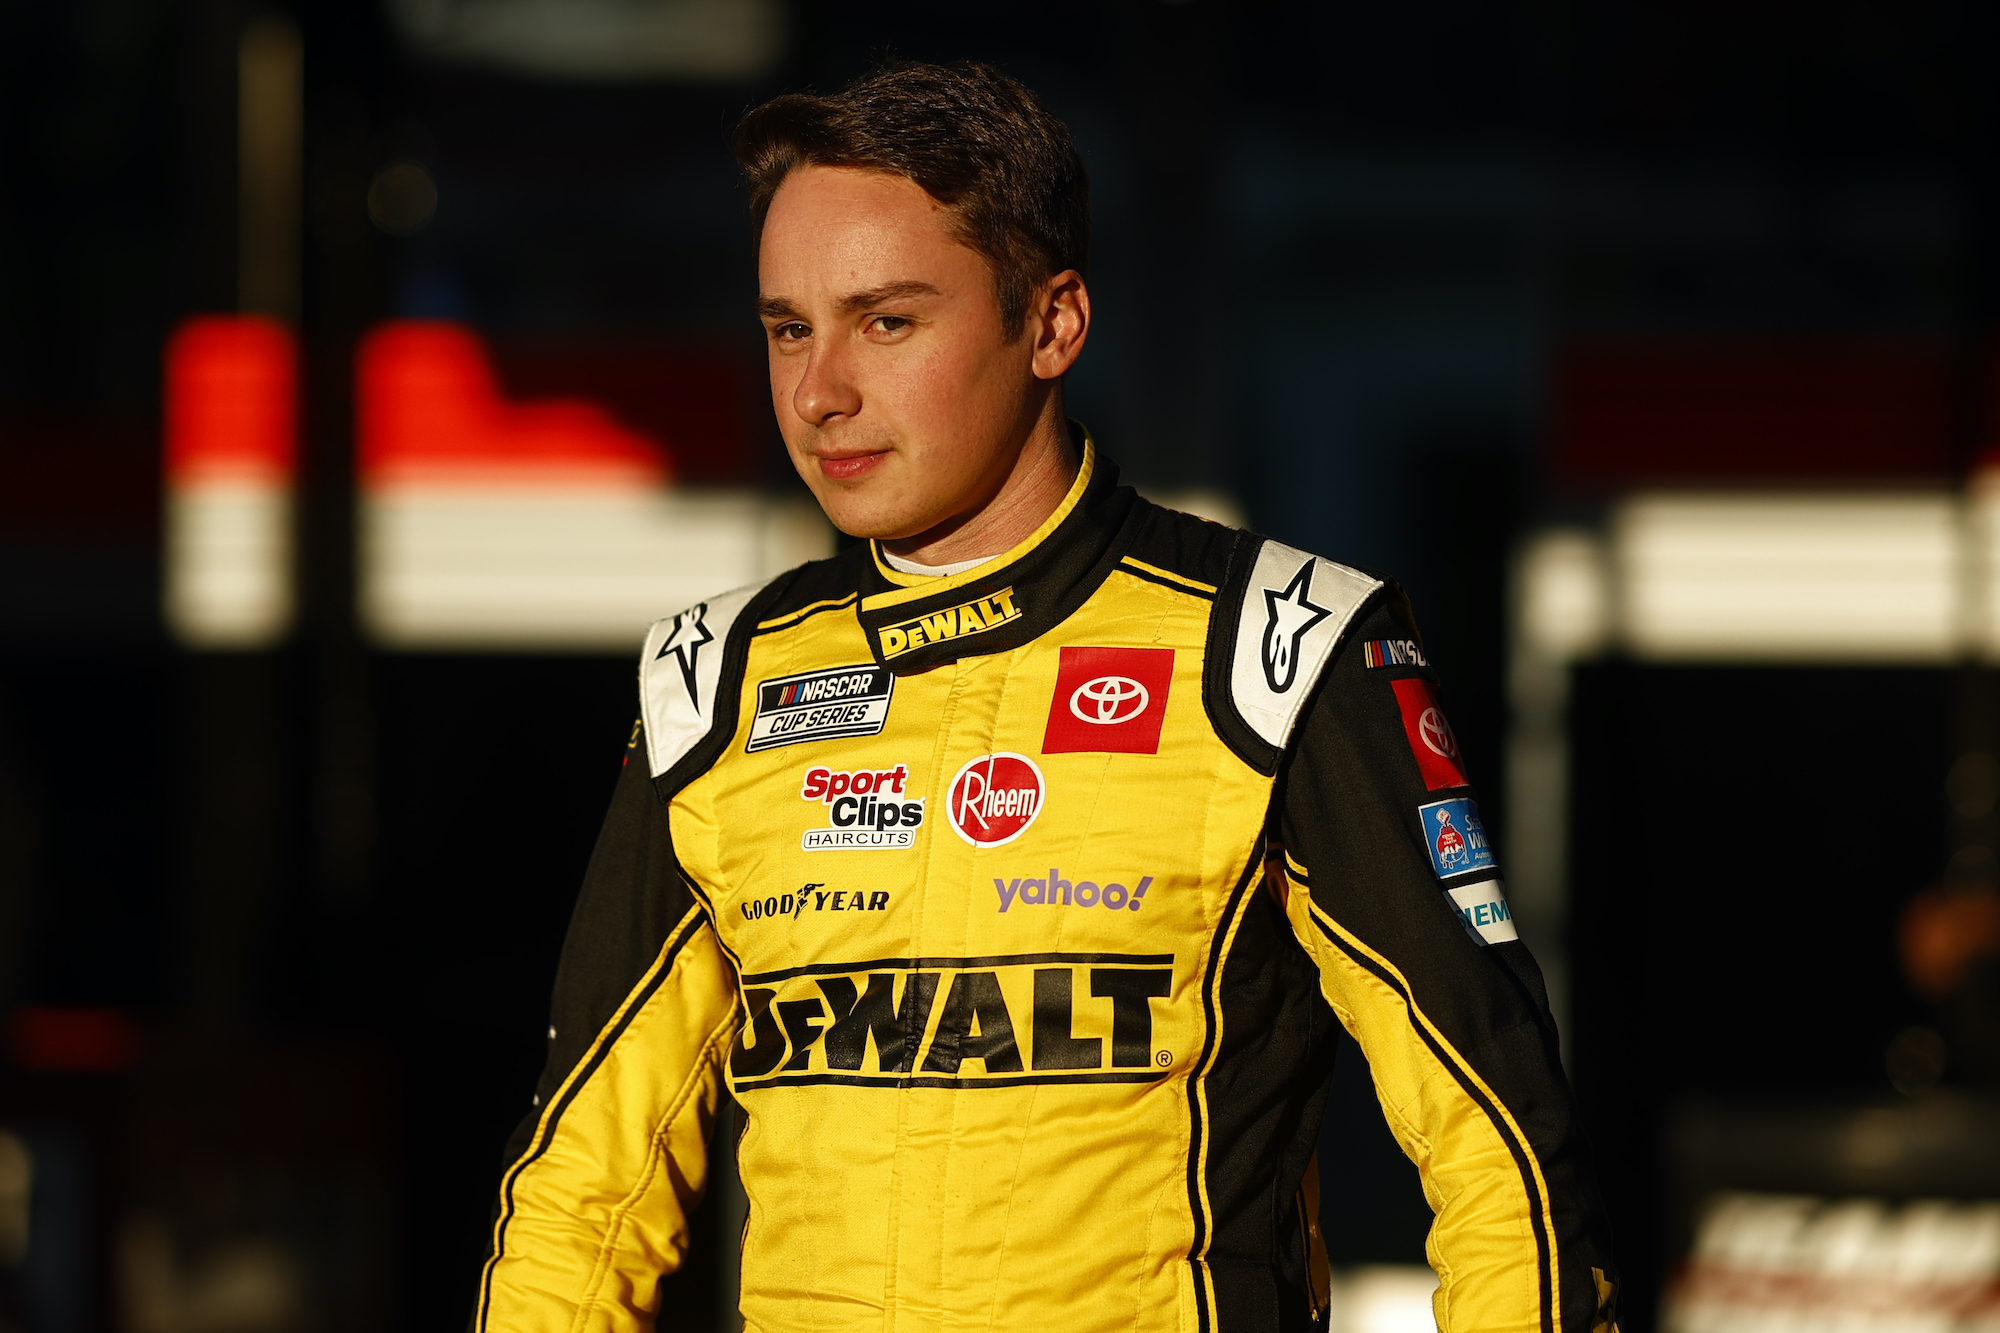 Christopher Bell at Phoenix